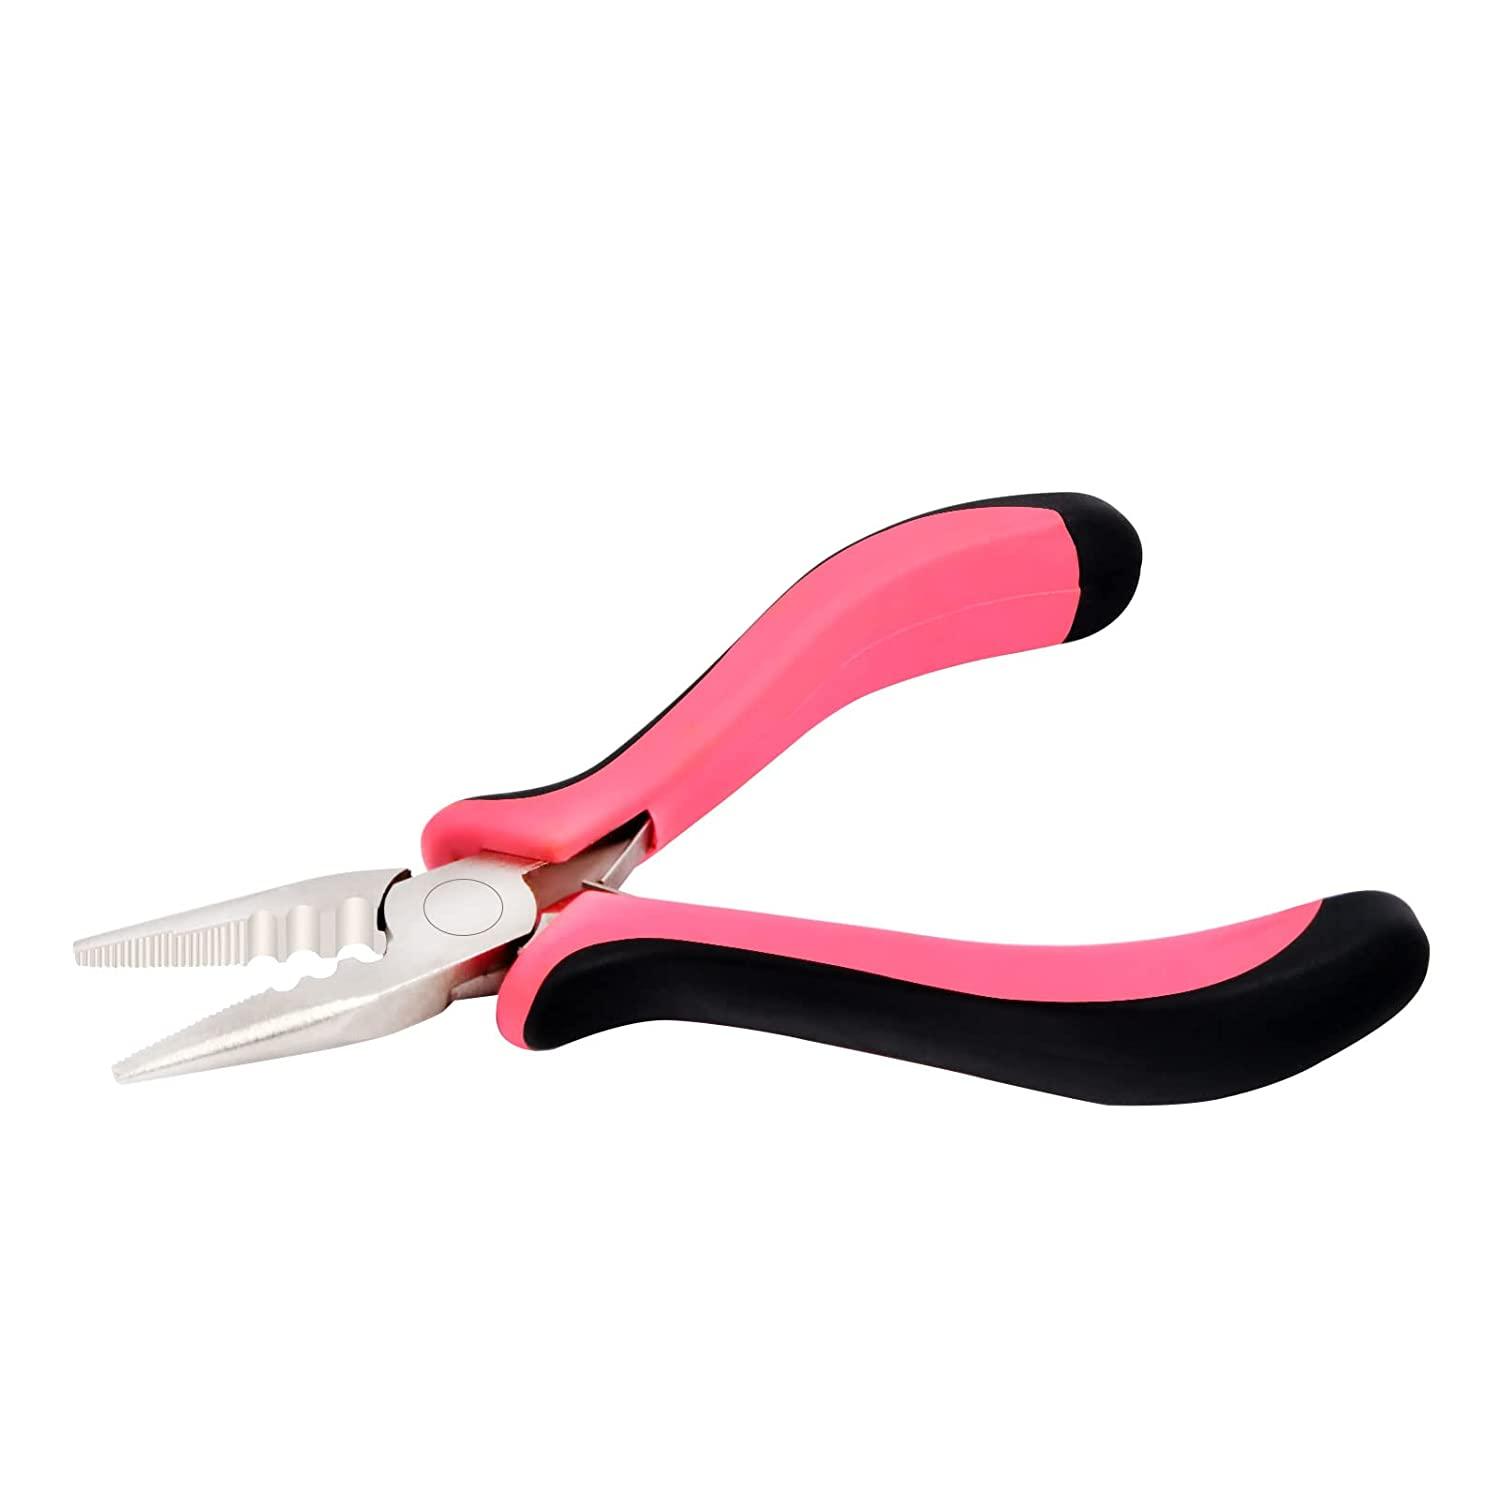 Flat Mouth Hair Extension Pliers for Removing Micro Rings, Nano Beads,  Crushing Keratin Glue Bonds, U-tip or I-tip Extensions 